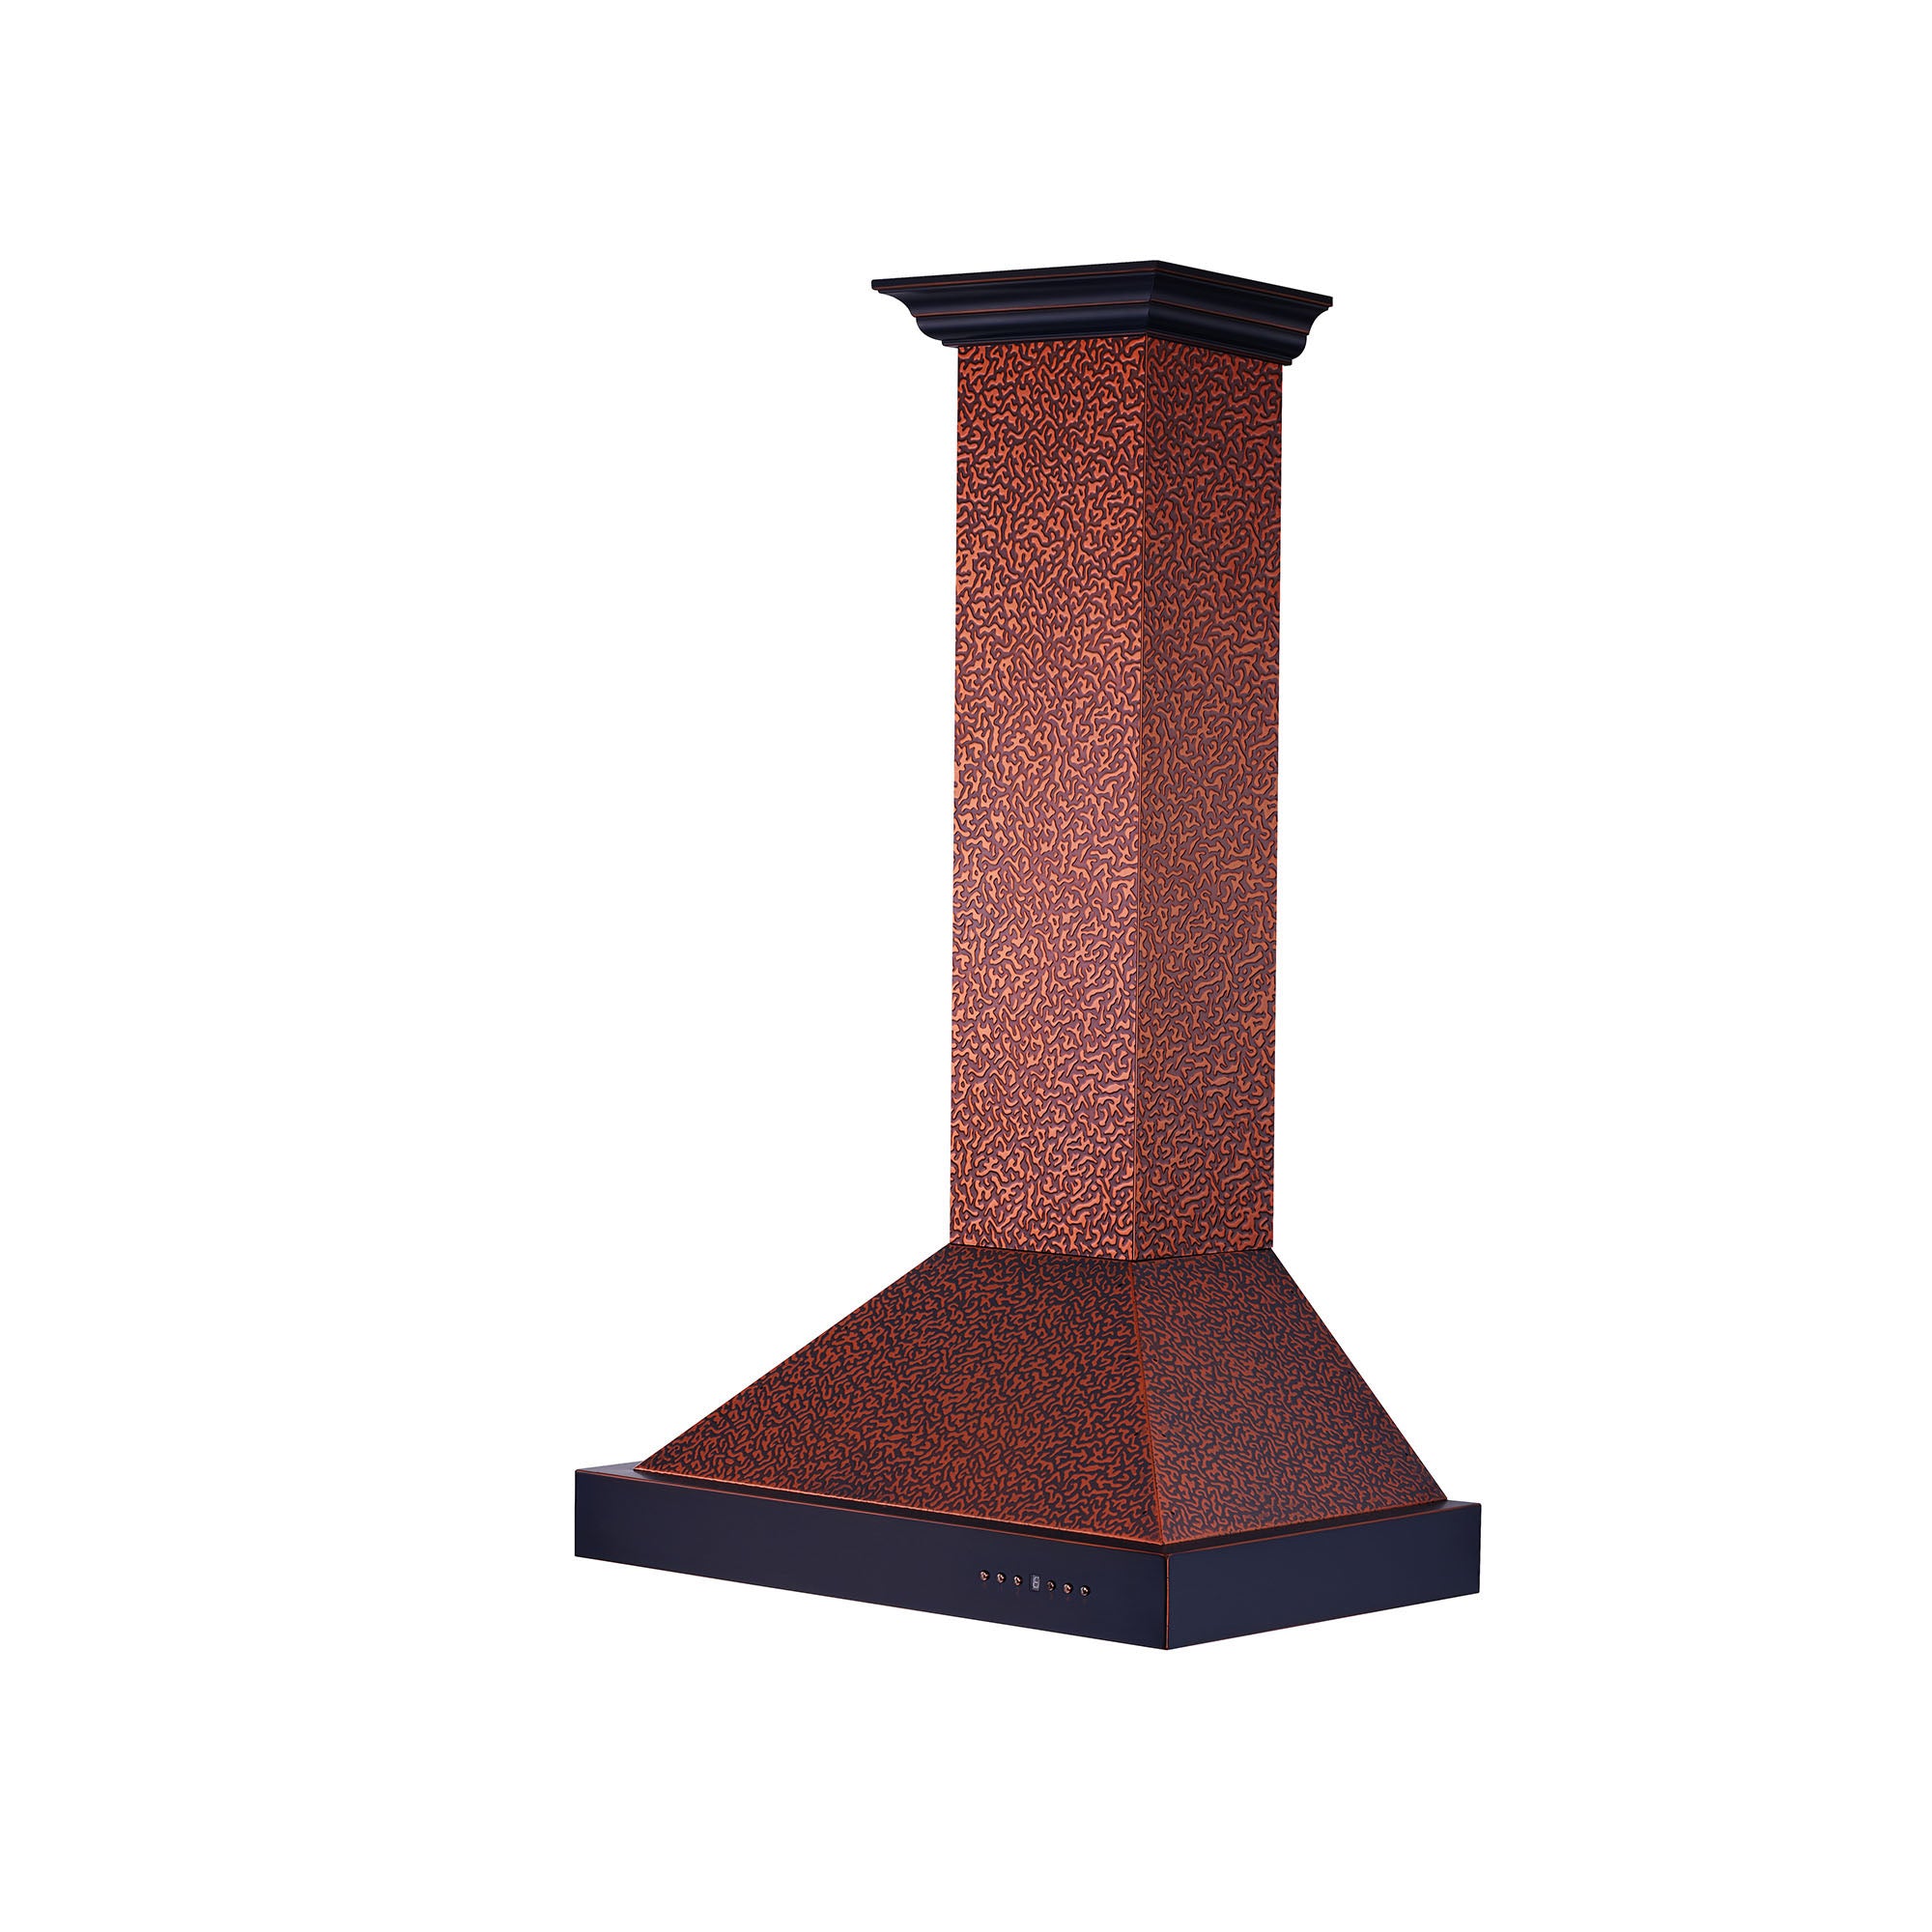 ZLINE Designer Series Wall Mount Range Hood in Embossed Copper with Size Options (KB2-EBXXX) 48 inch